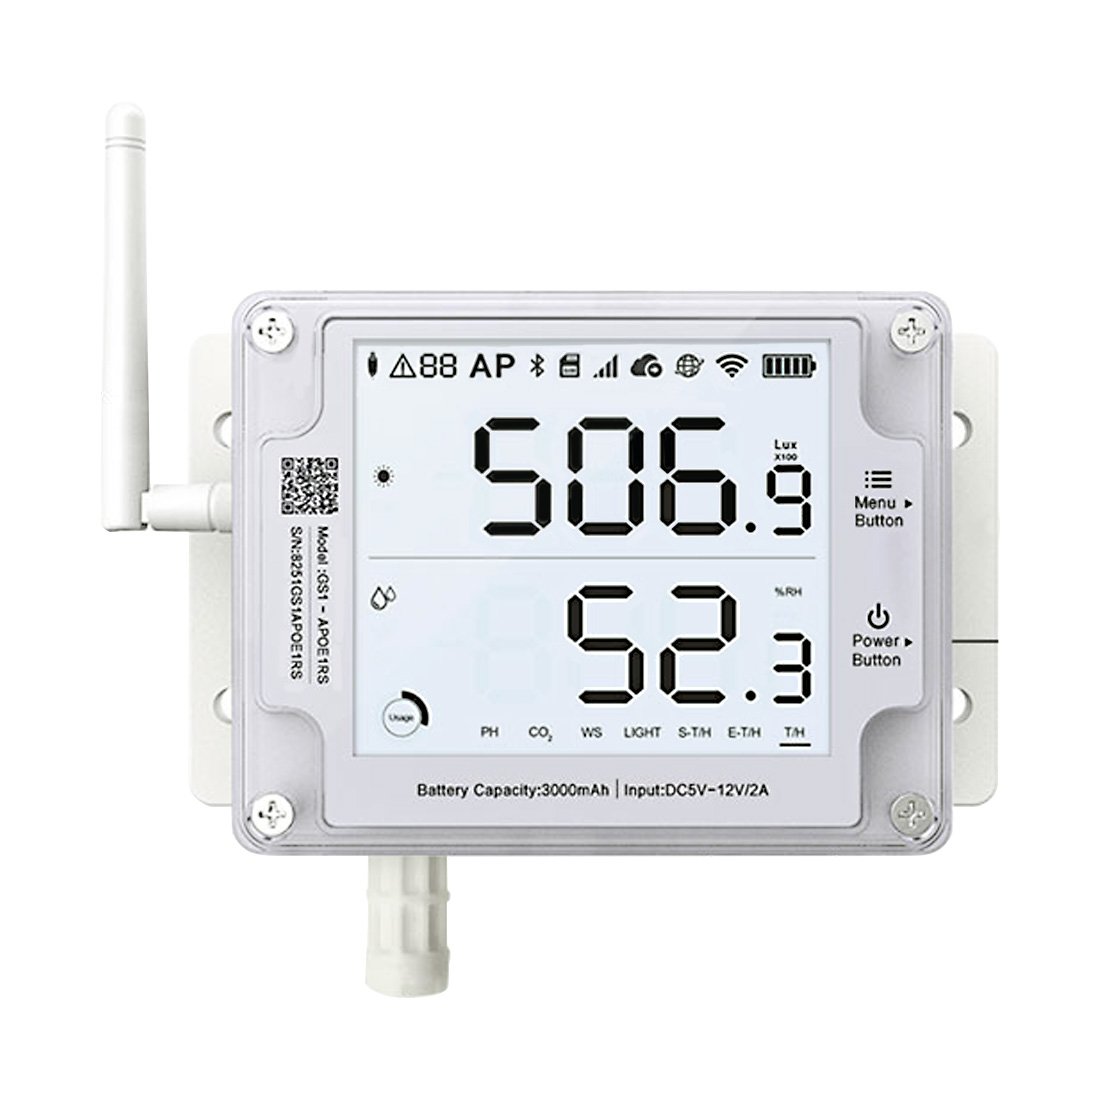 Industrial Grade Wireless Temperature and Humidity Sensor with